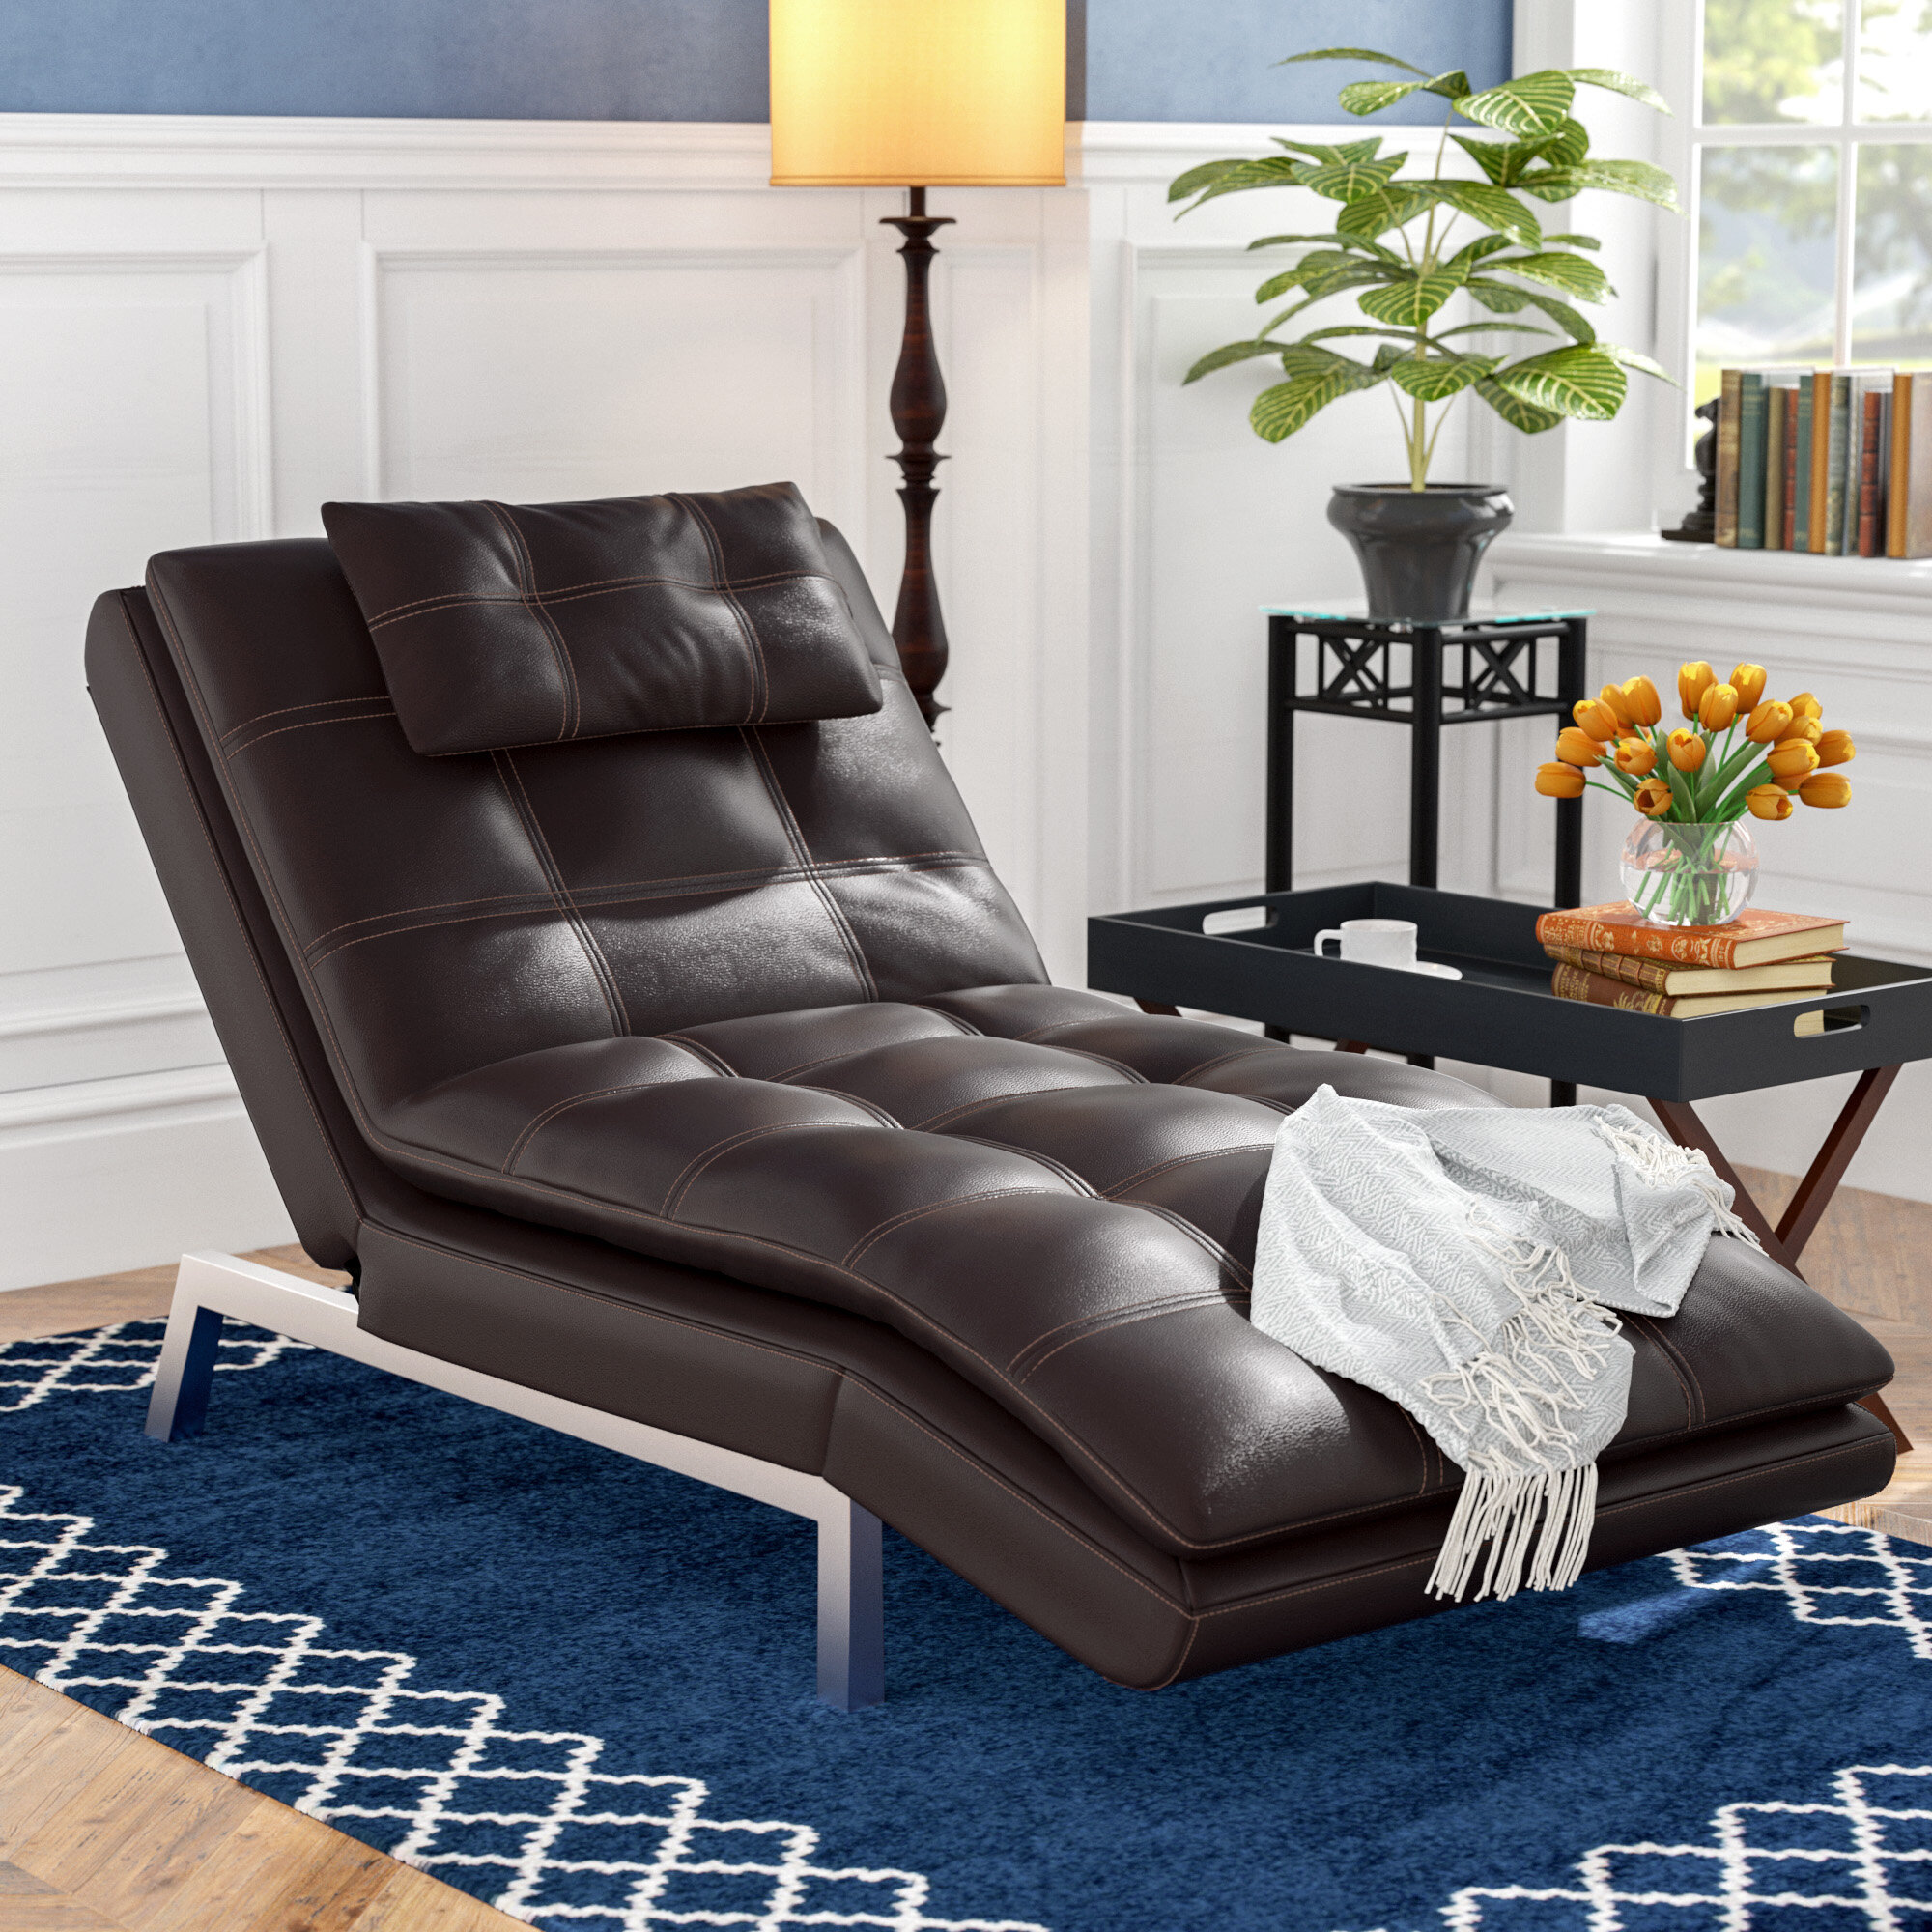 Andover Mills Dryden Chaise Lounge Reviews Wayfair